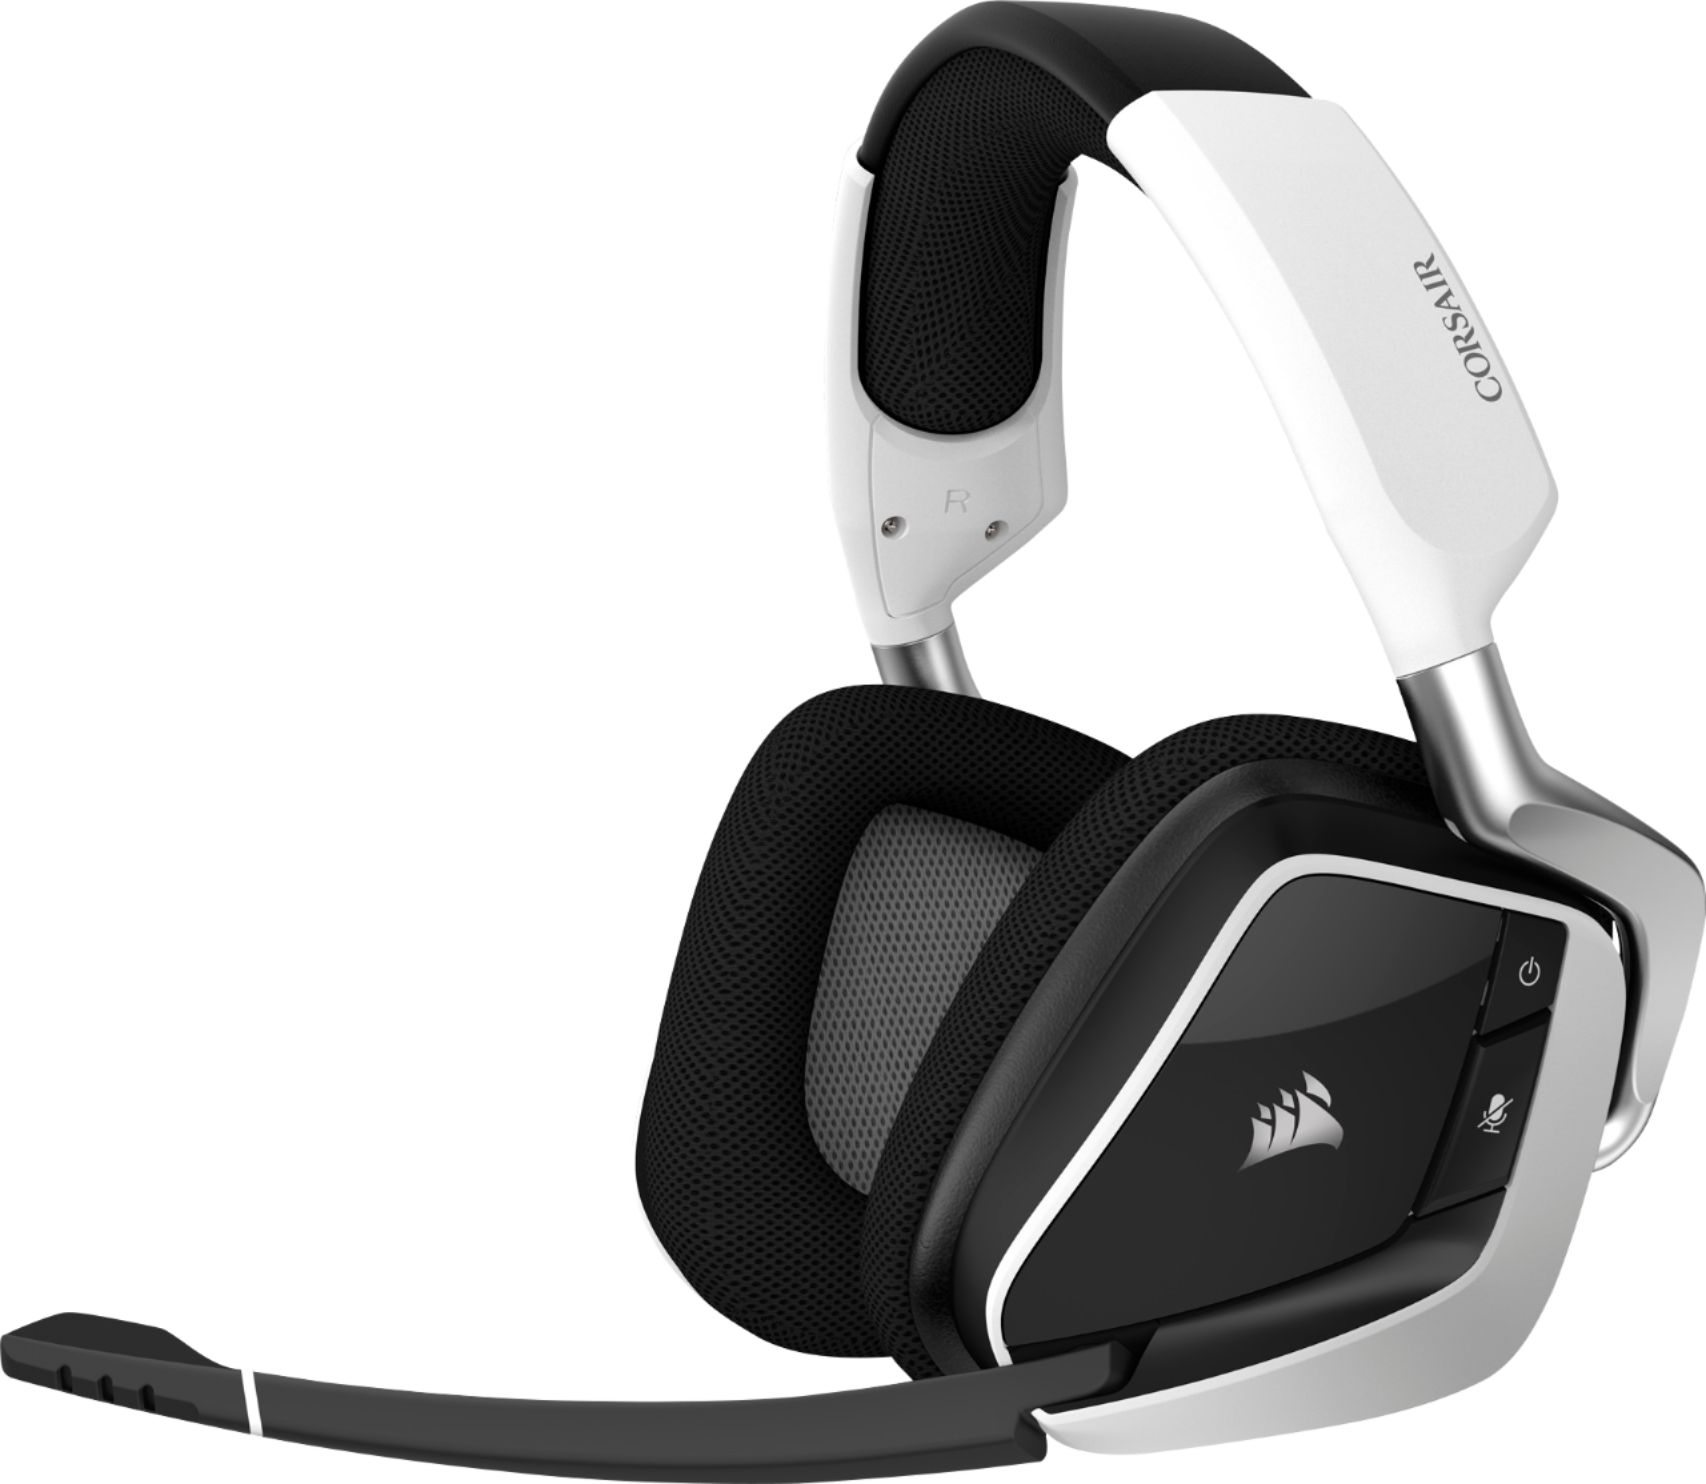 Angle View: CORSAIR - VOID RGB ELITE Wireless 7.1 Surround Sound Gaming Headset for PC, PS5, PS4 - White